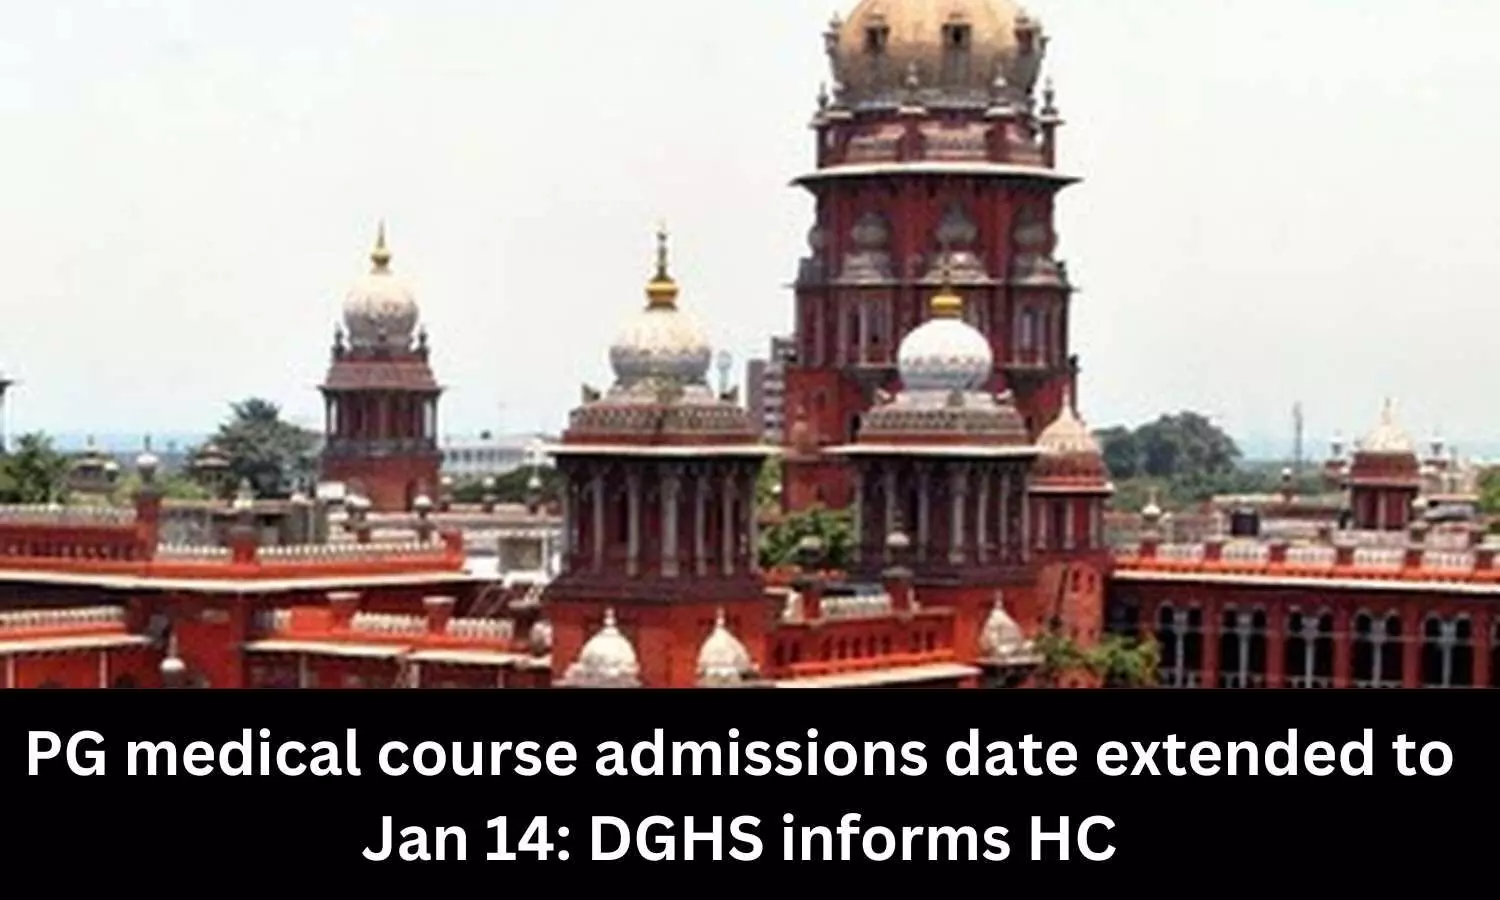 PG medical course admissions date extended to Jan 14: DGHS informs Madras HC